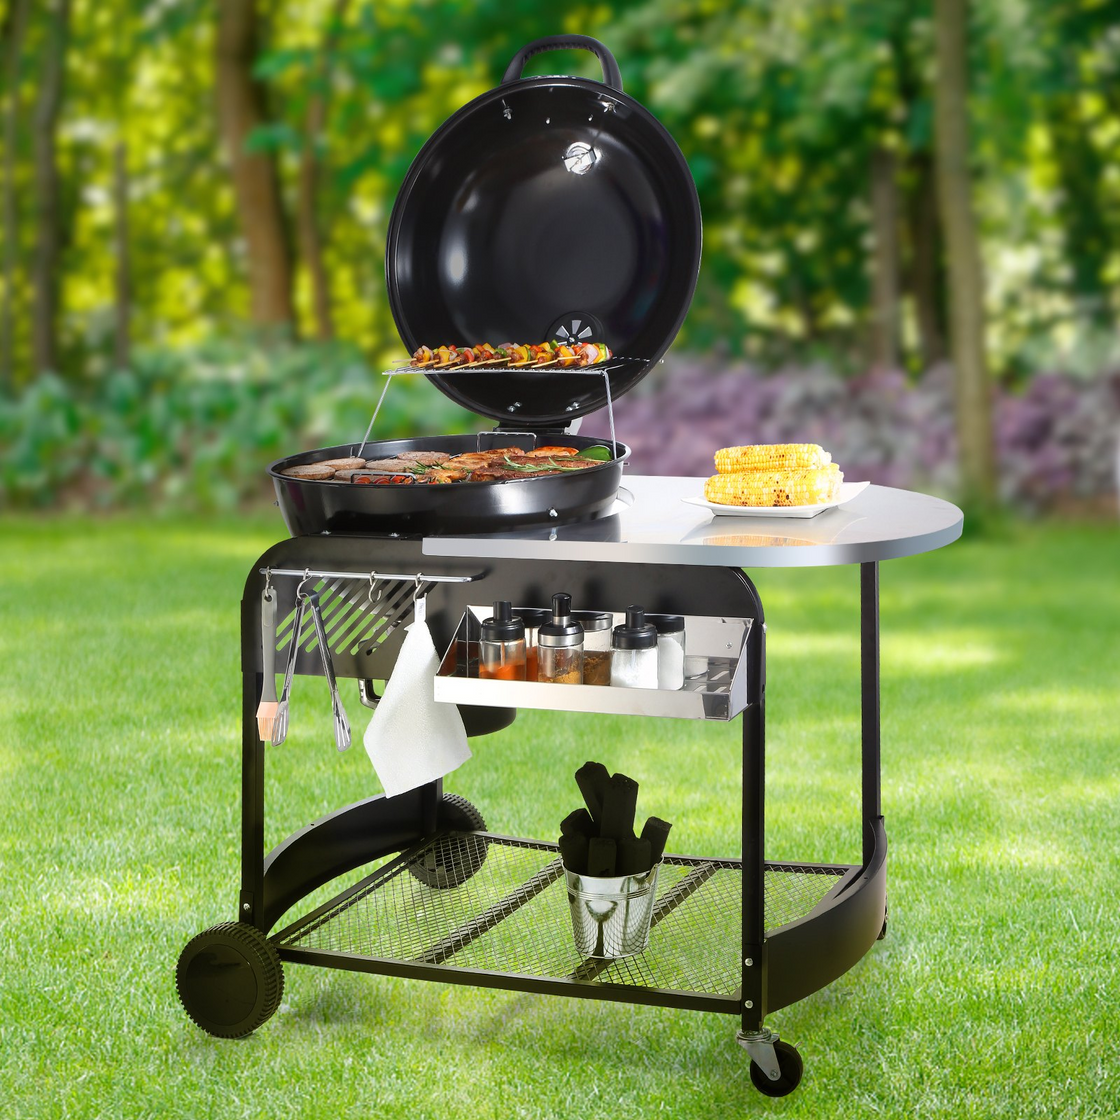 VEVOR 21-inch Kettle Charcoal Grill BBQ Portable Grill with Cart | Outdoor Cooking